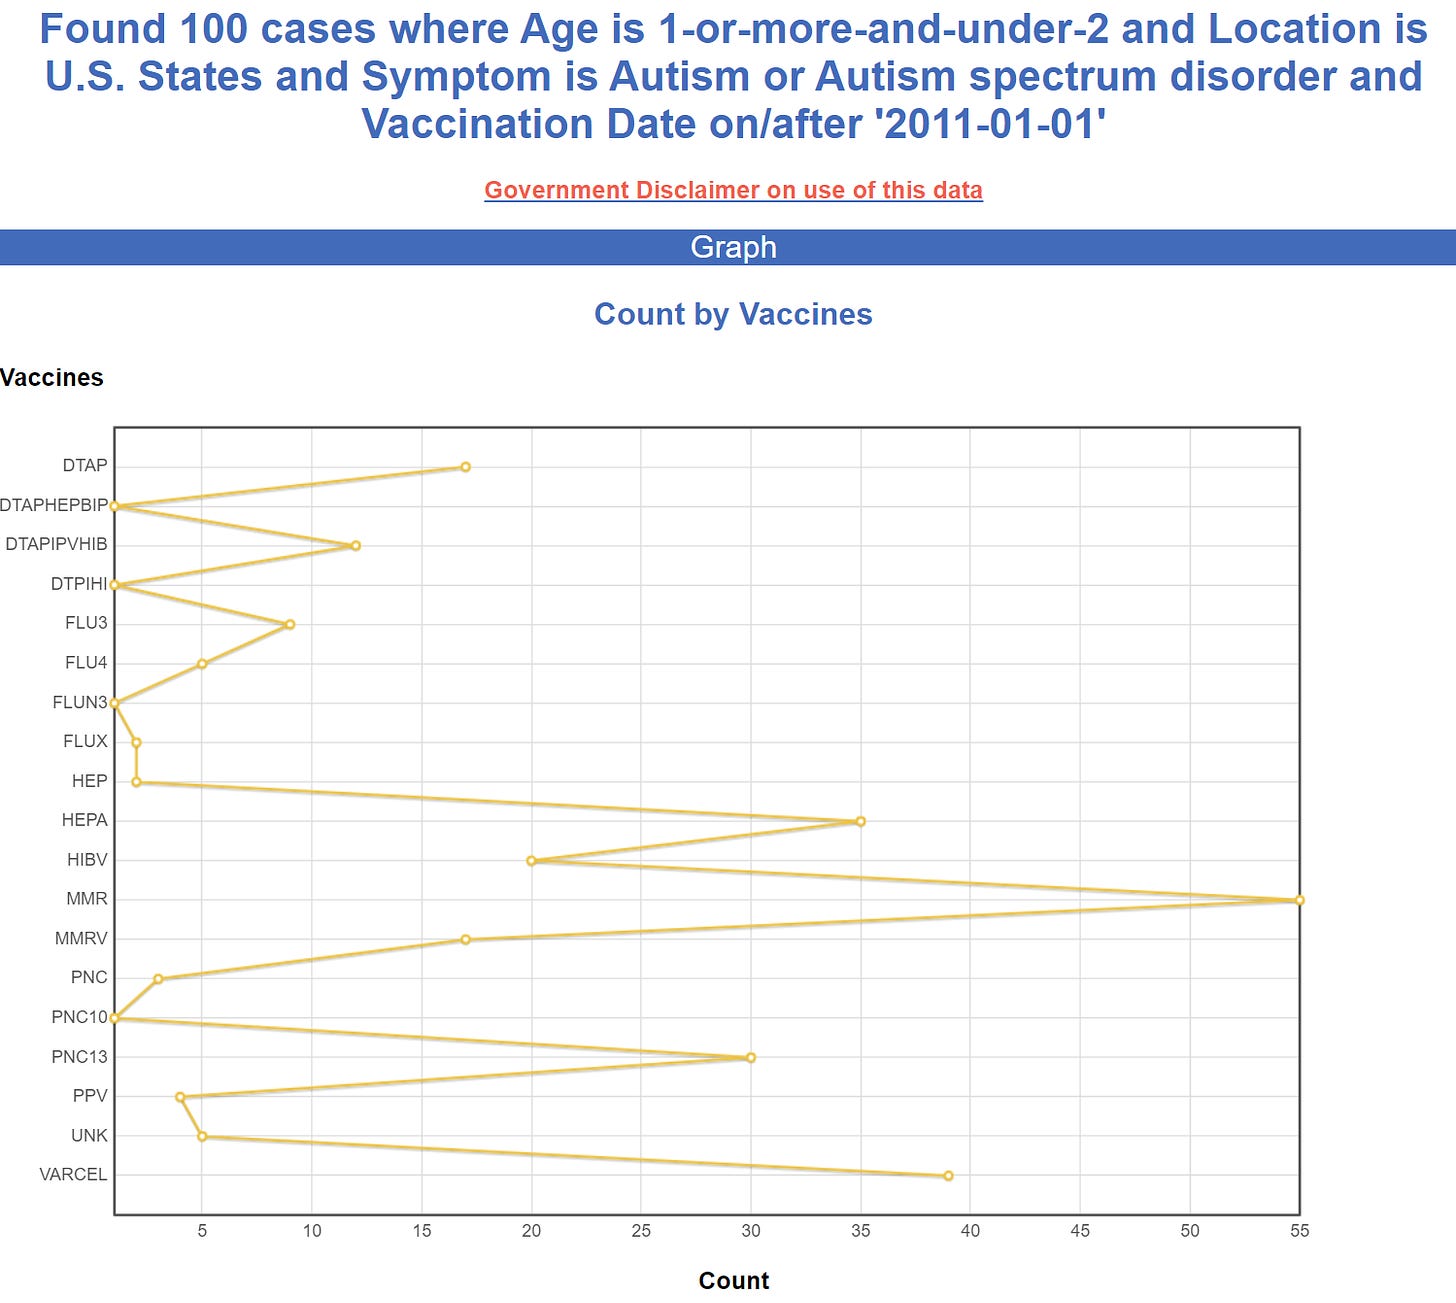 VAERS data shows that vaccines cause autism Https%3A%2F%2Fsubstack-post-media.s3.amazonaws.com%2Fpublic%2Fimages%2F15d66155-801e-4636-b796-1ed7cc60ad82_1499x1341